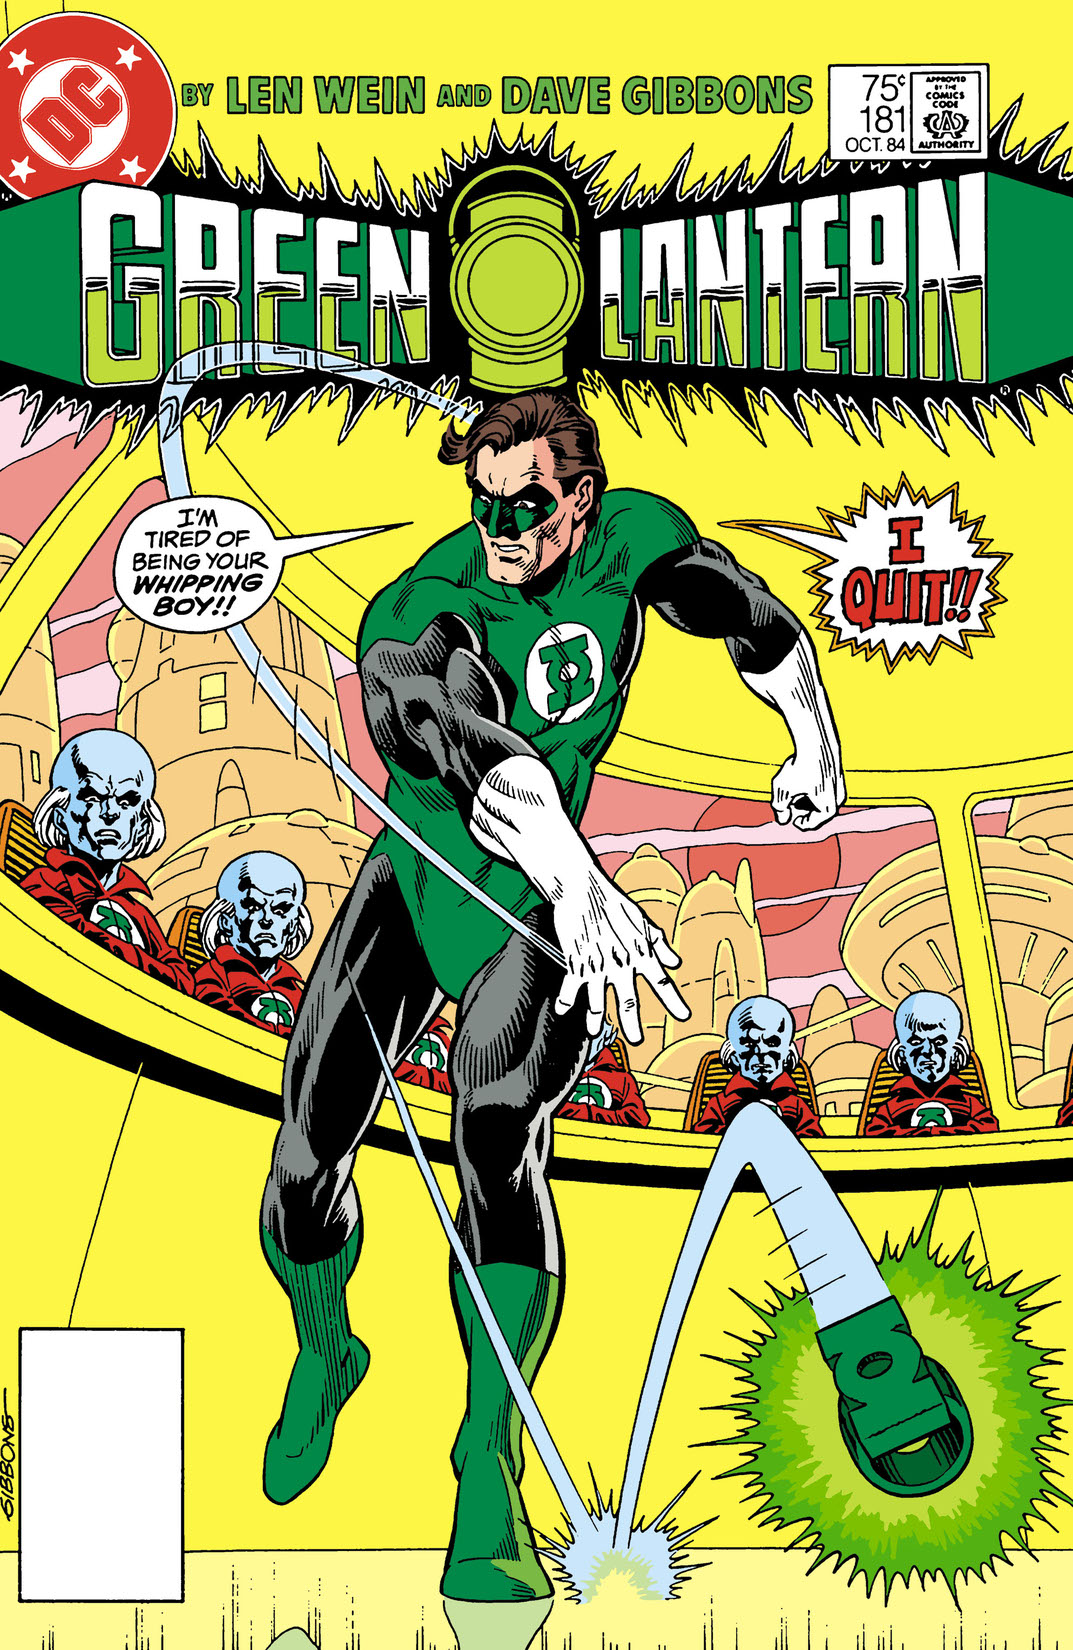 Green Lantern (1960-) #181 preview images